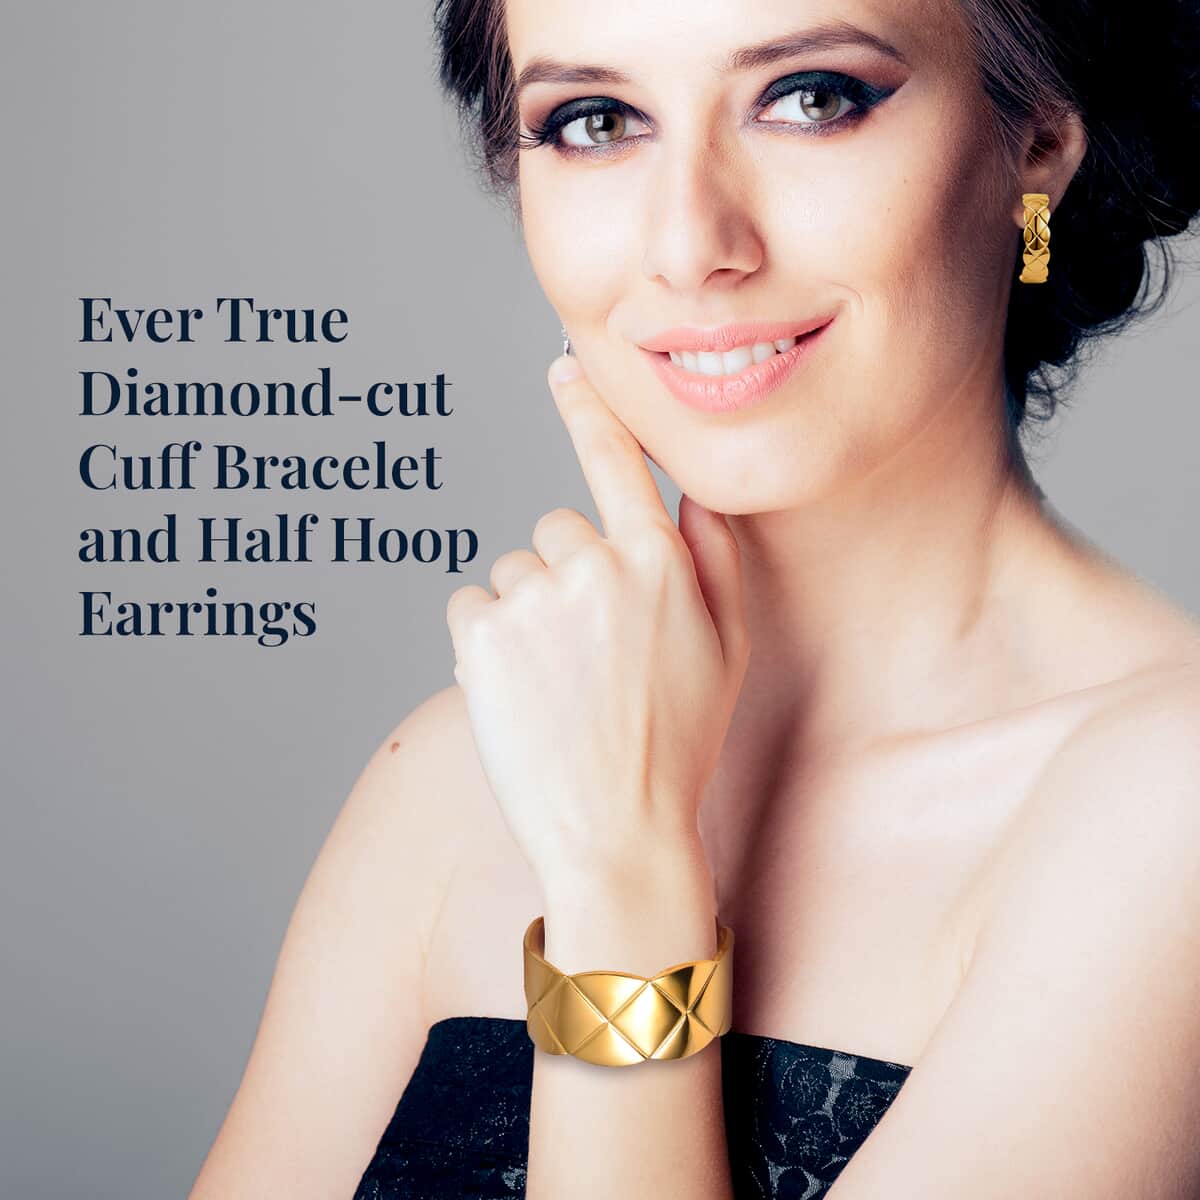 Ever True Diamond-cut Cuff Bracelet (7.0 In) and Half Hoop Earrings in ION Plated Yellow Gold Stainless Steel, Jewelry Set, Birthday Gift For Her image number 2